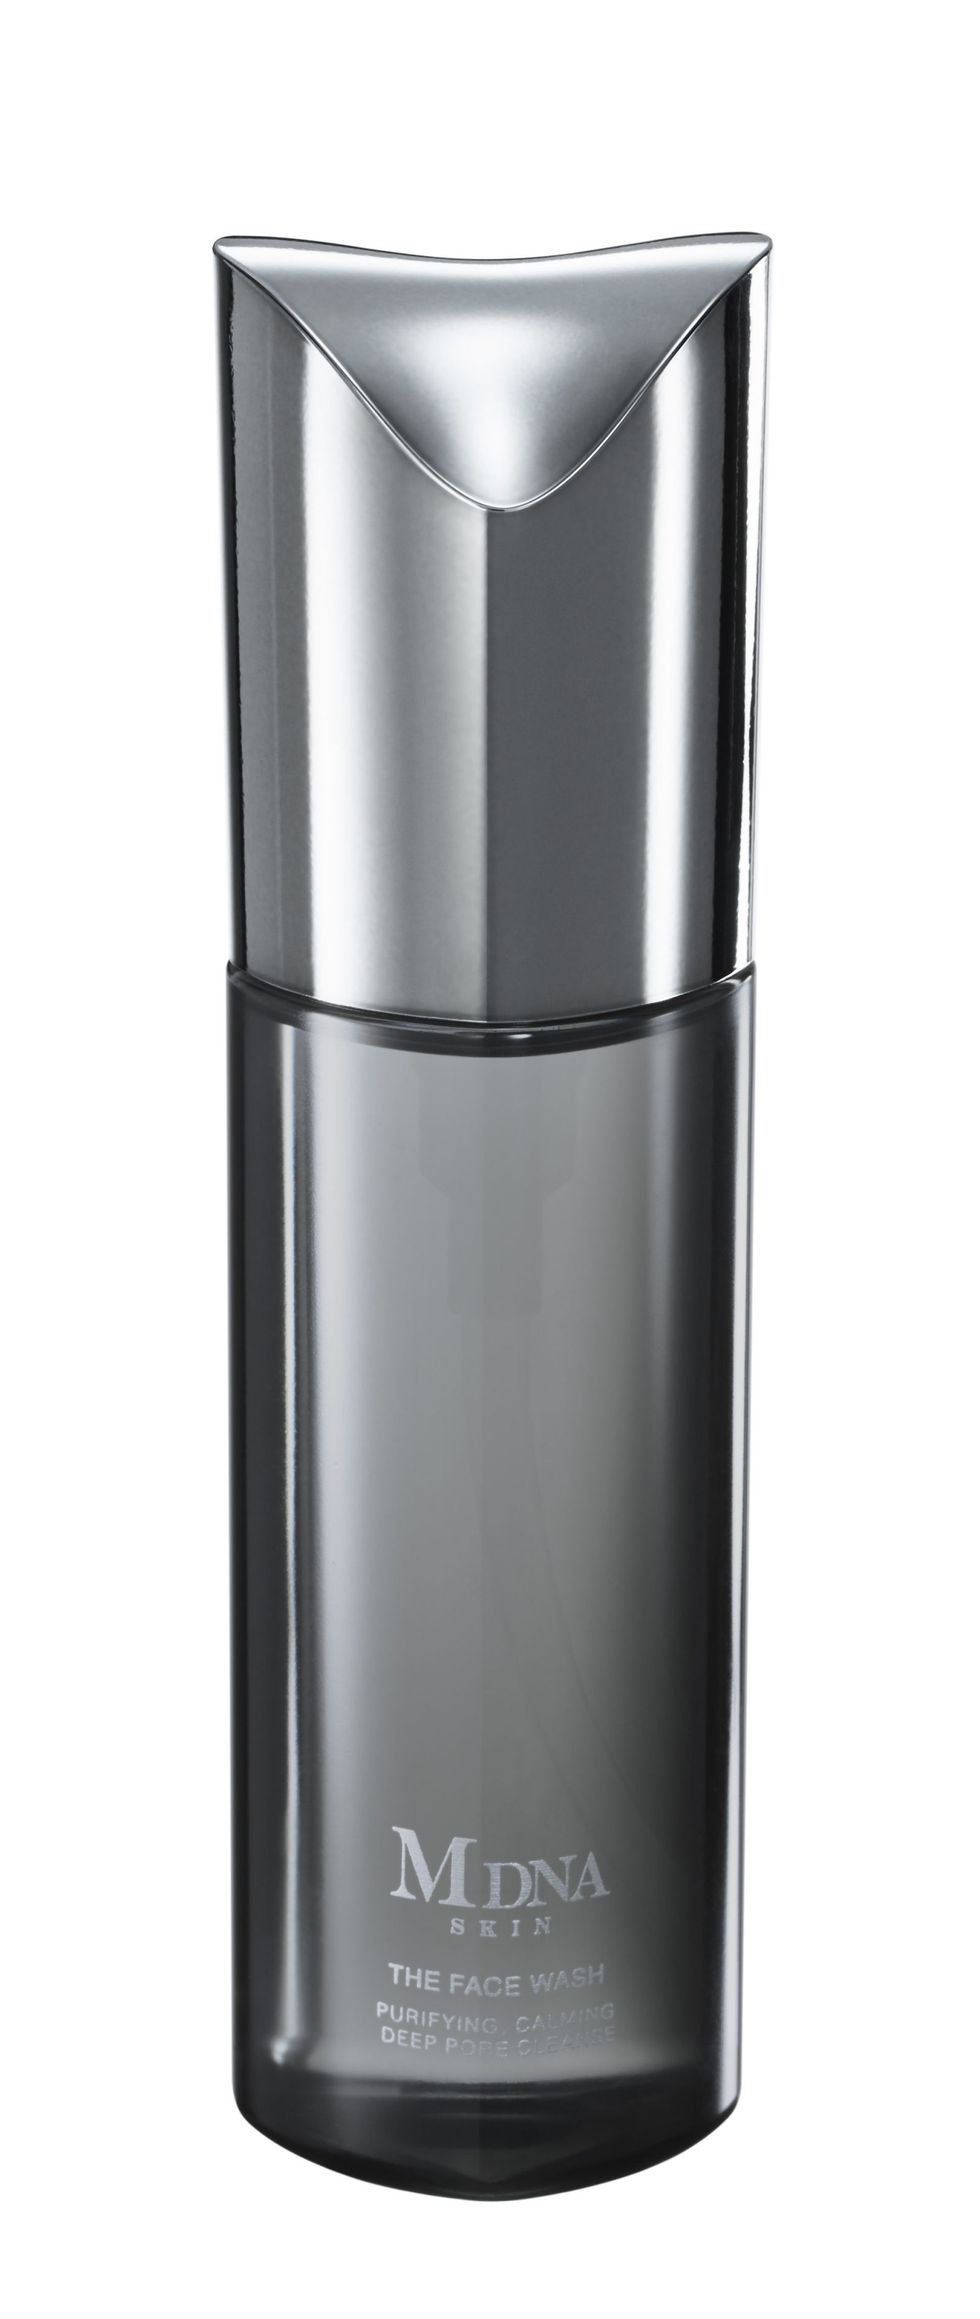 Metal, Grey, Cylinder, Aluminium, Silver, Steel, Black-and-white, Nickel, Tin, Home appliance, 